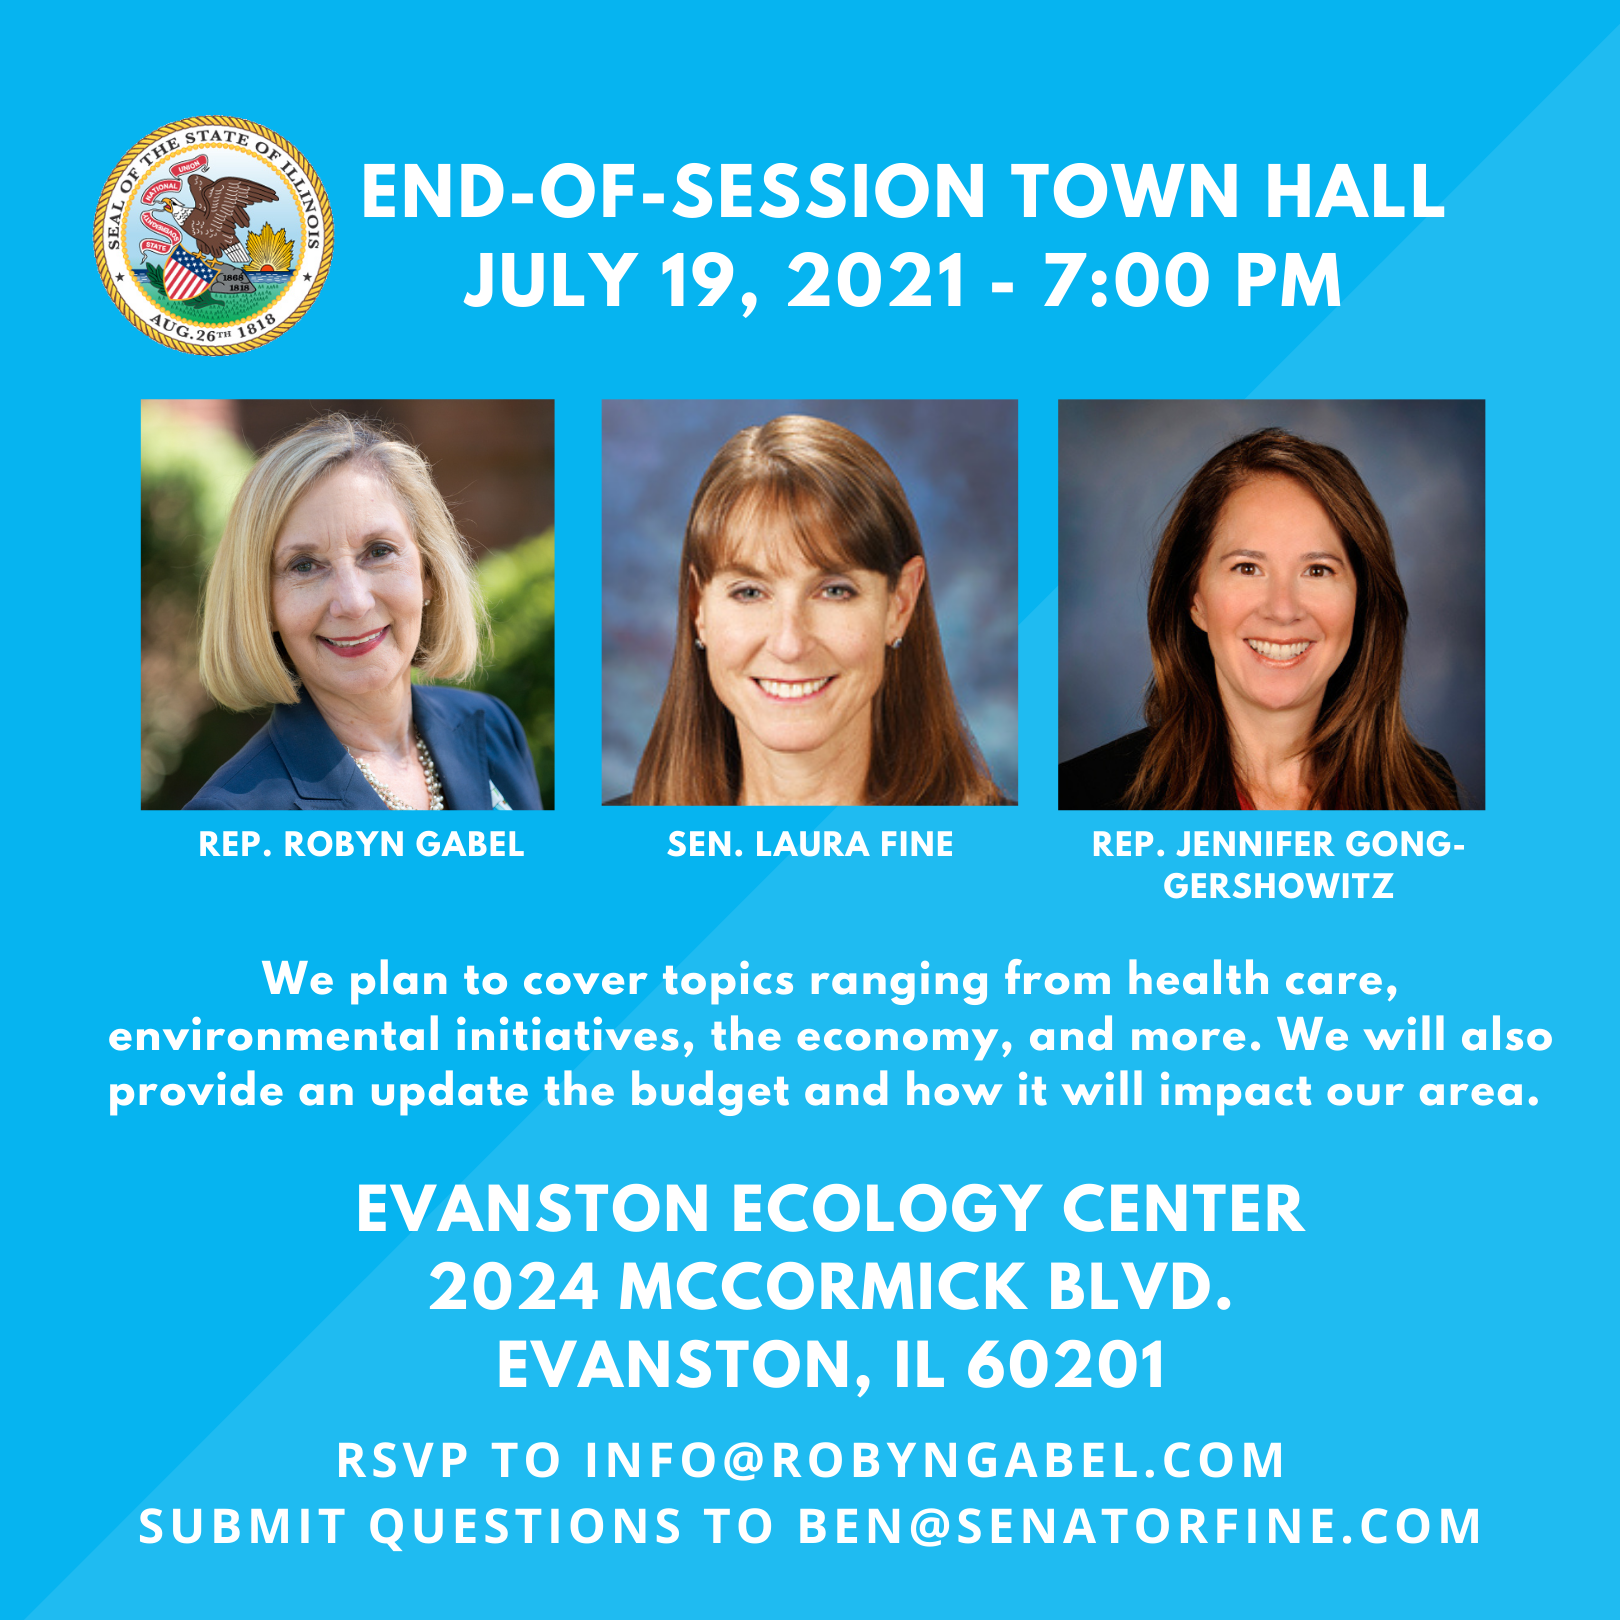 End-of-Session Town Hall July 19th